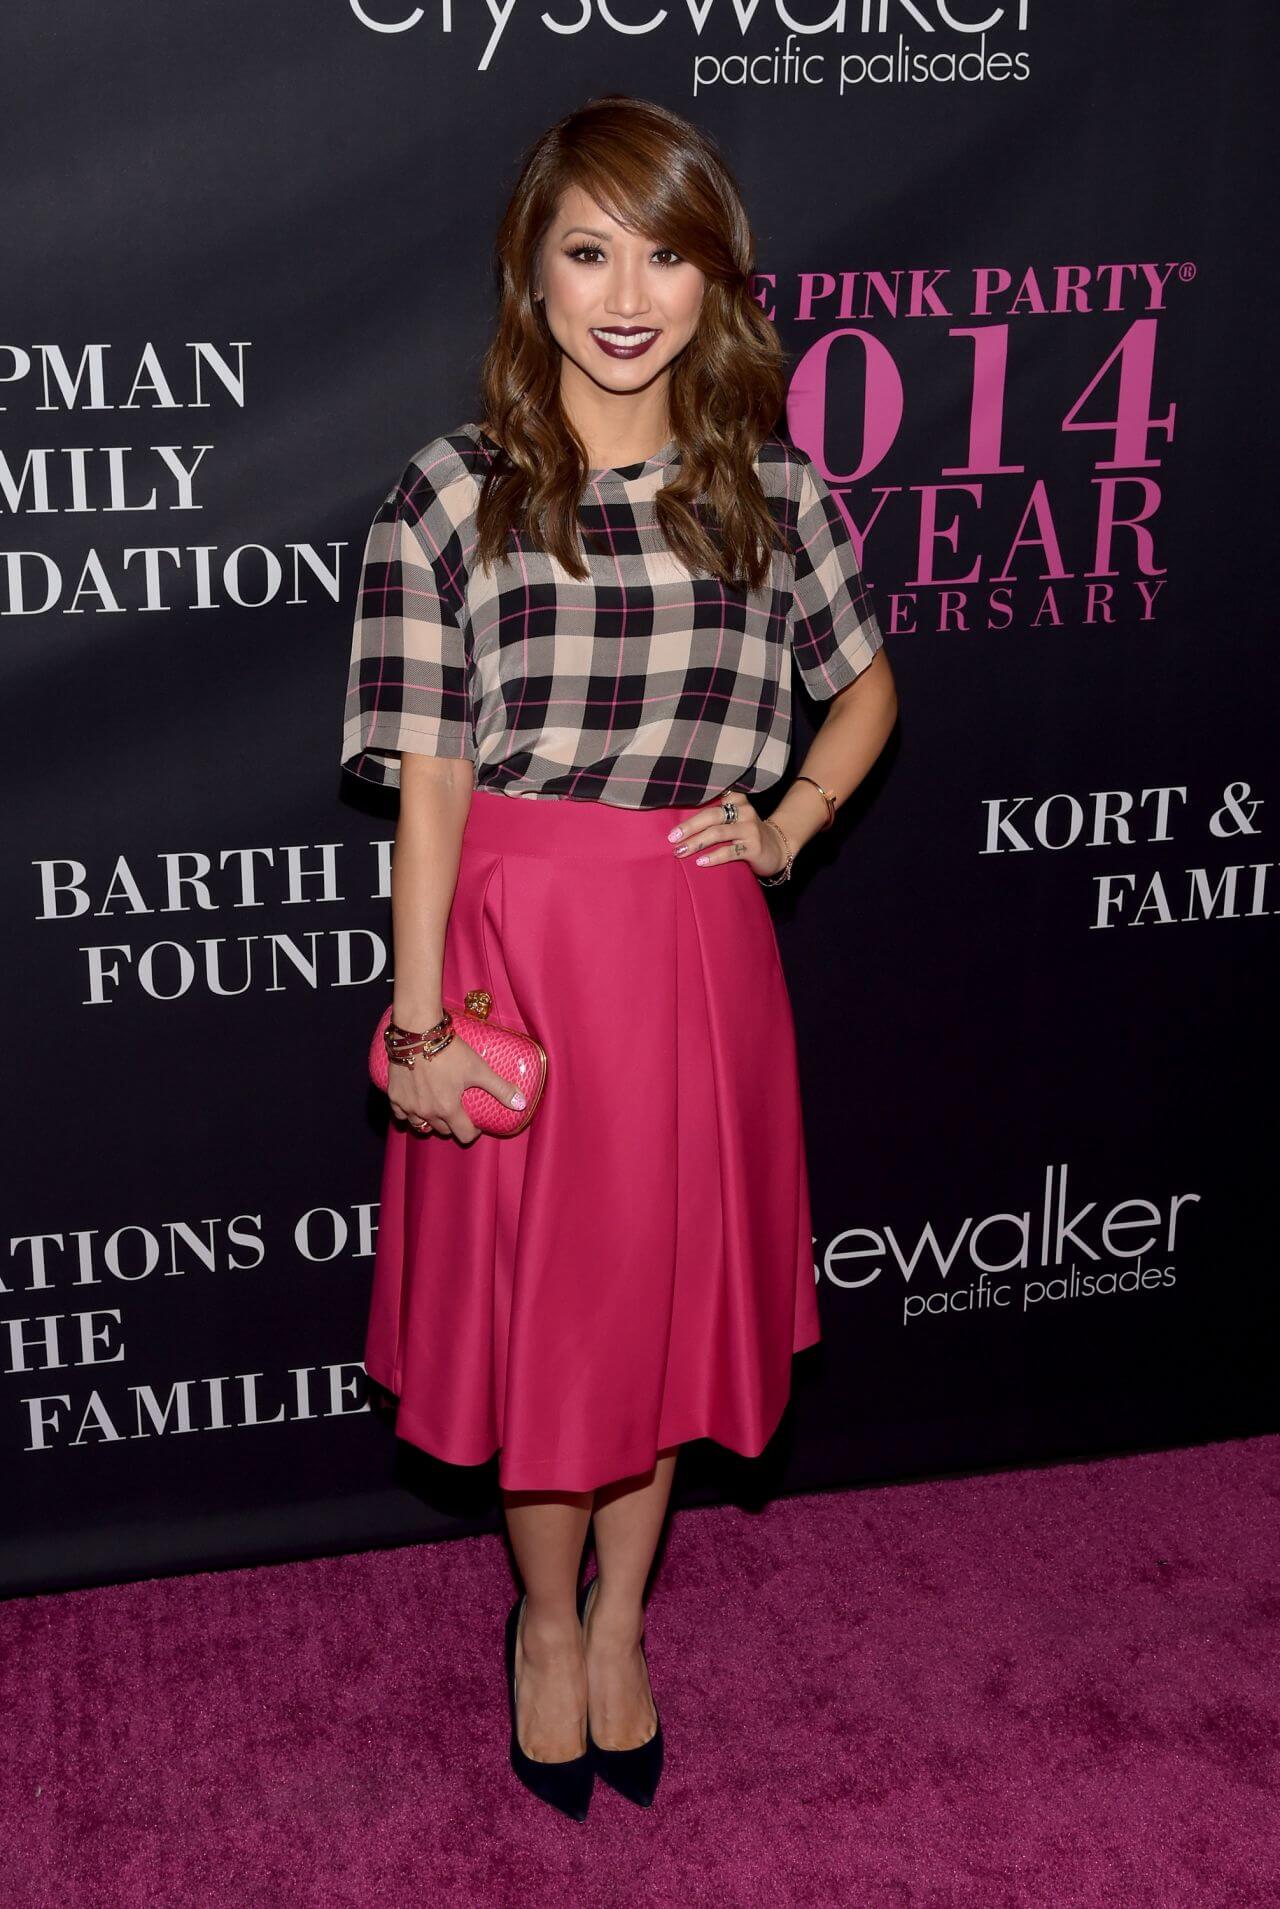 Brenda Song In Checked Top With Pink Skirt Outfit At Pink Party in Santa Monica